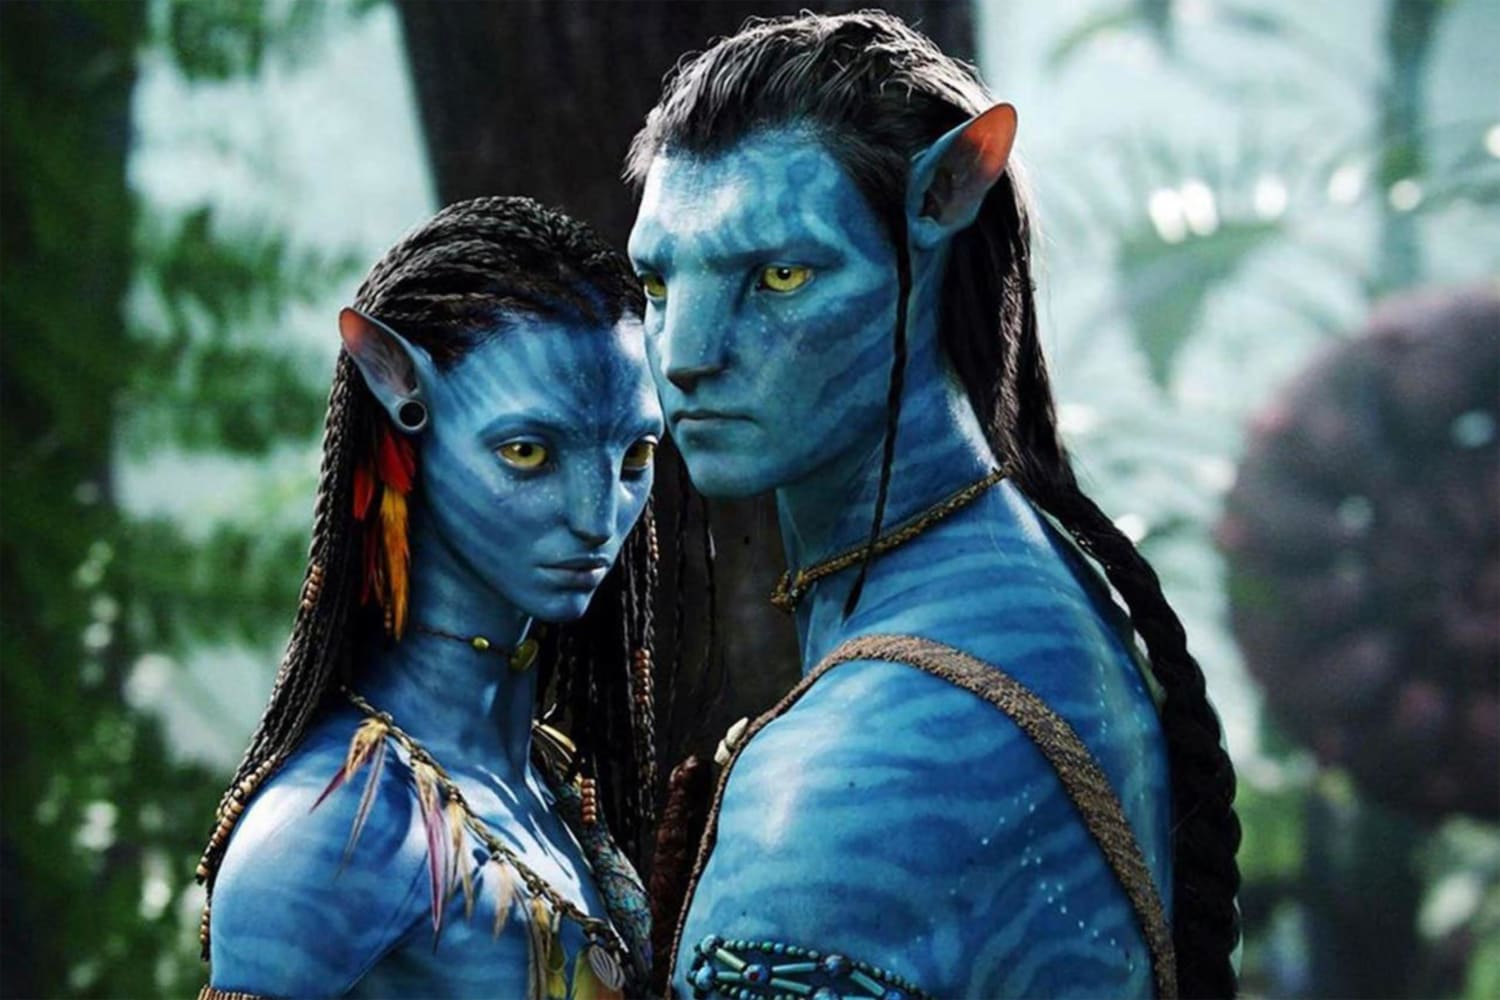 What To Remember From 'Avatar:' Movie Recap Before Sequel